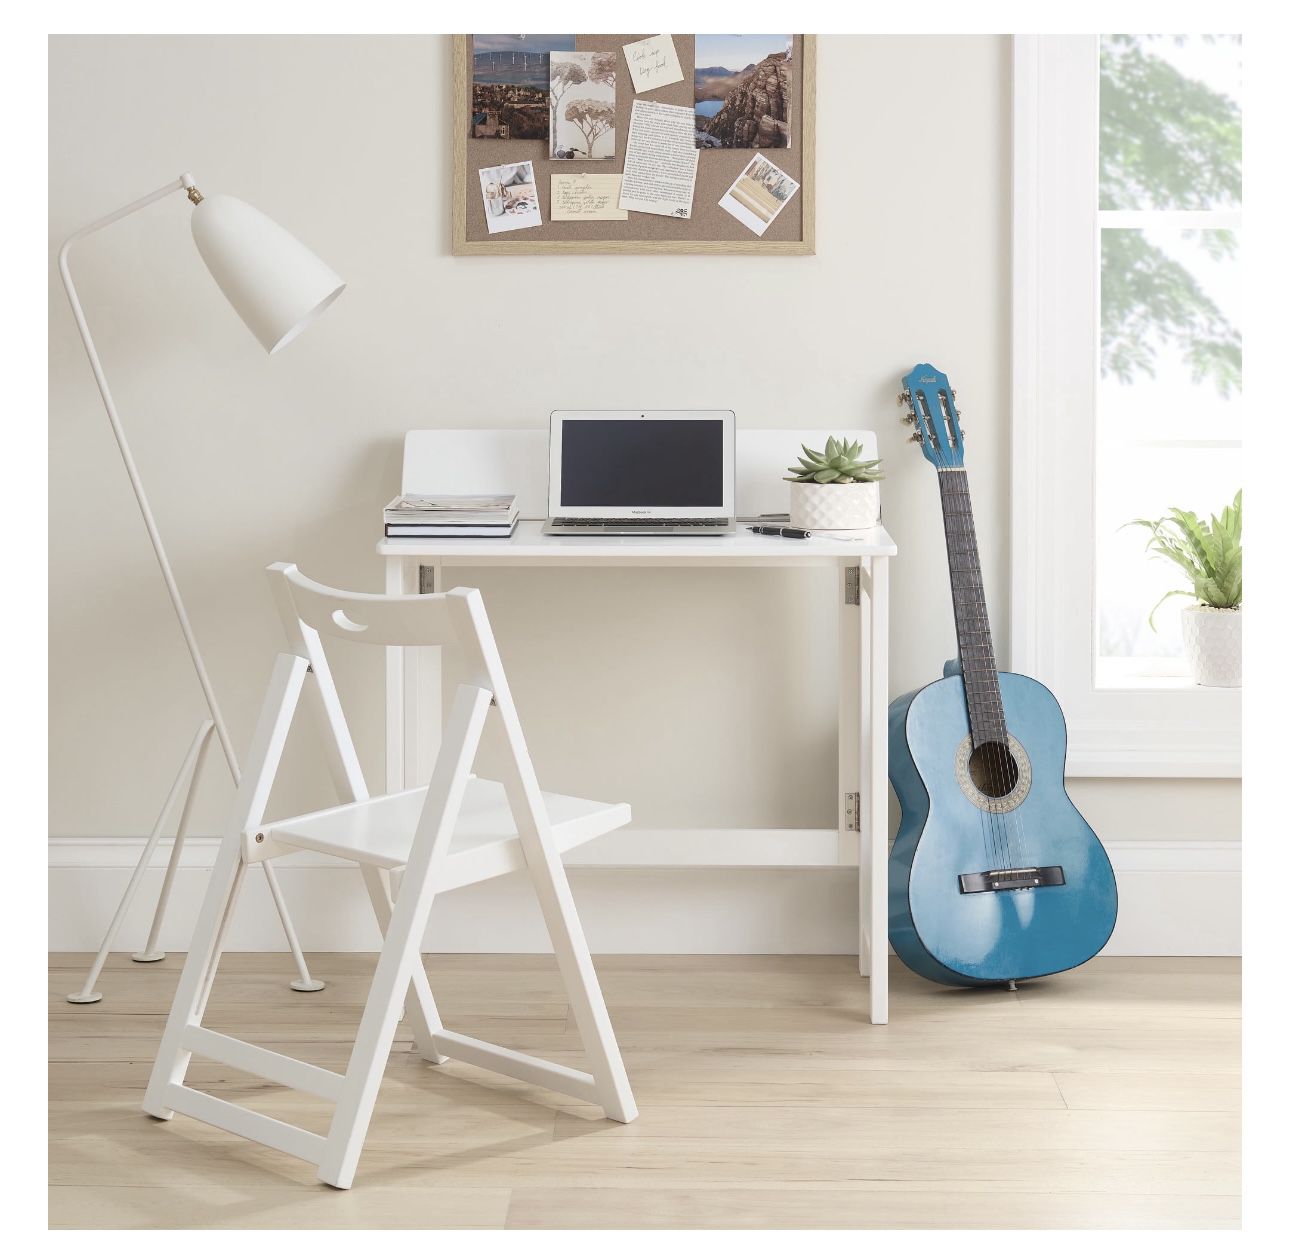 Your Zone Kids Desk and Chair, White